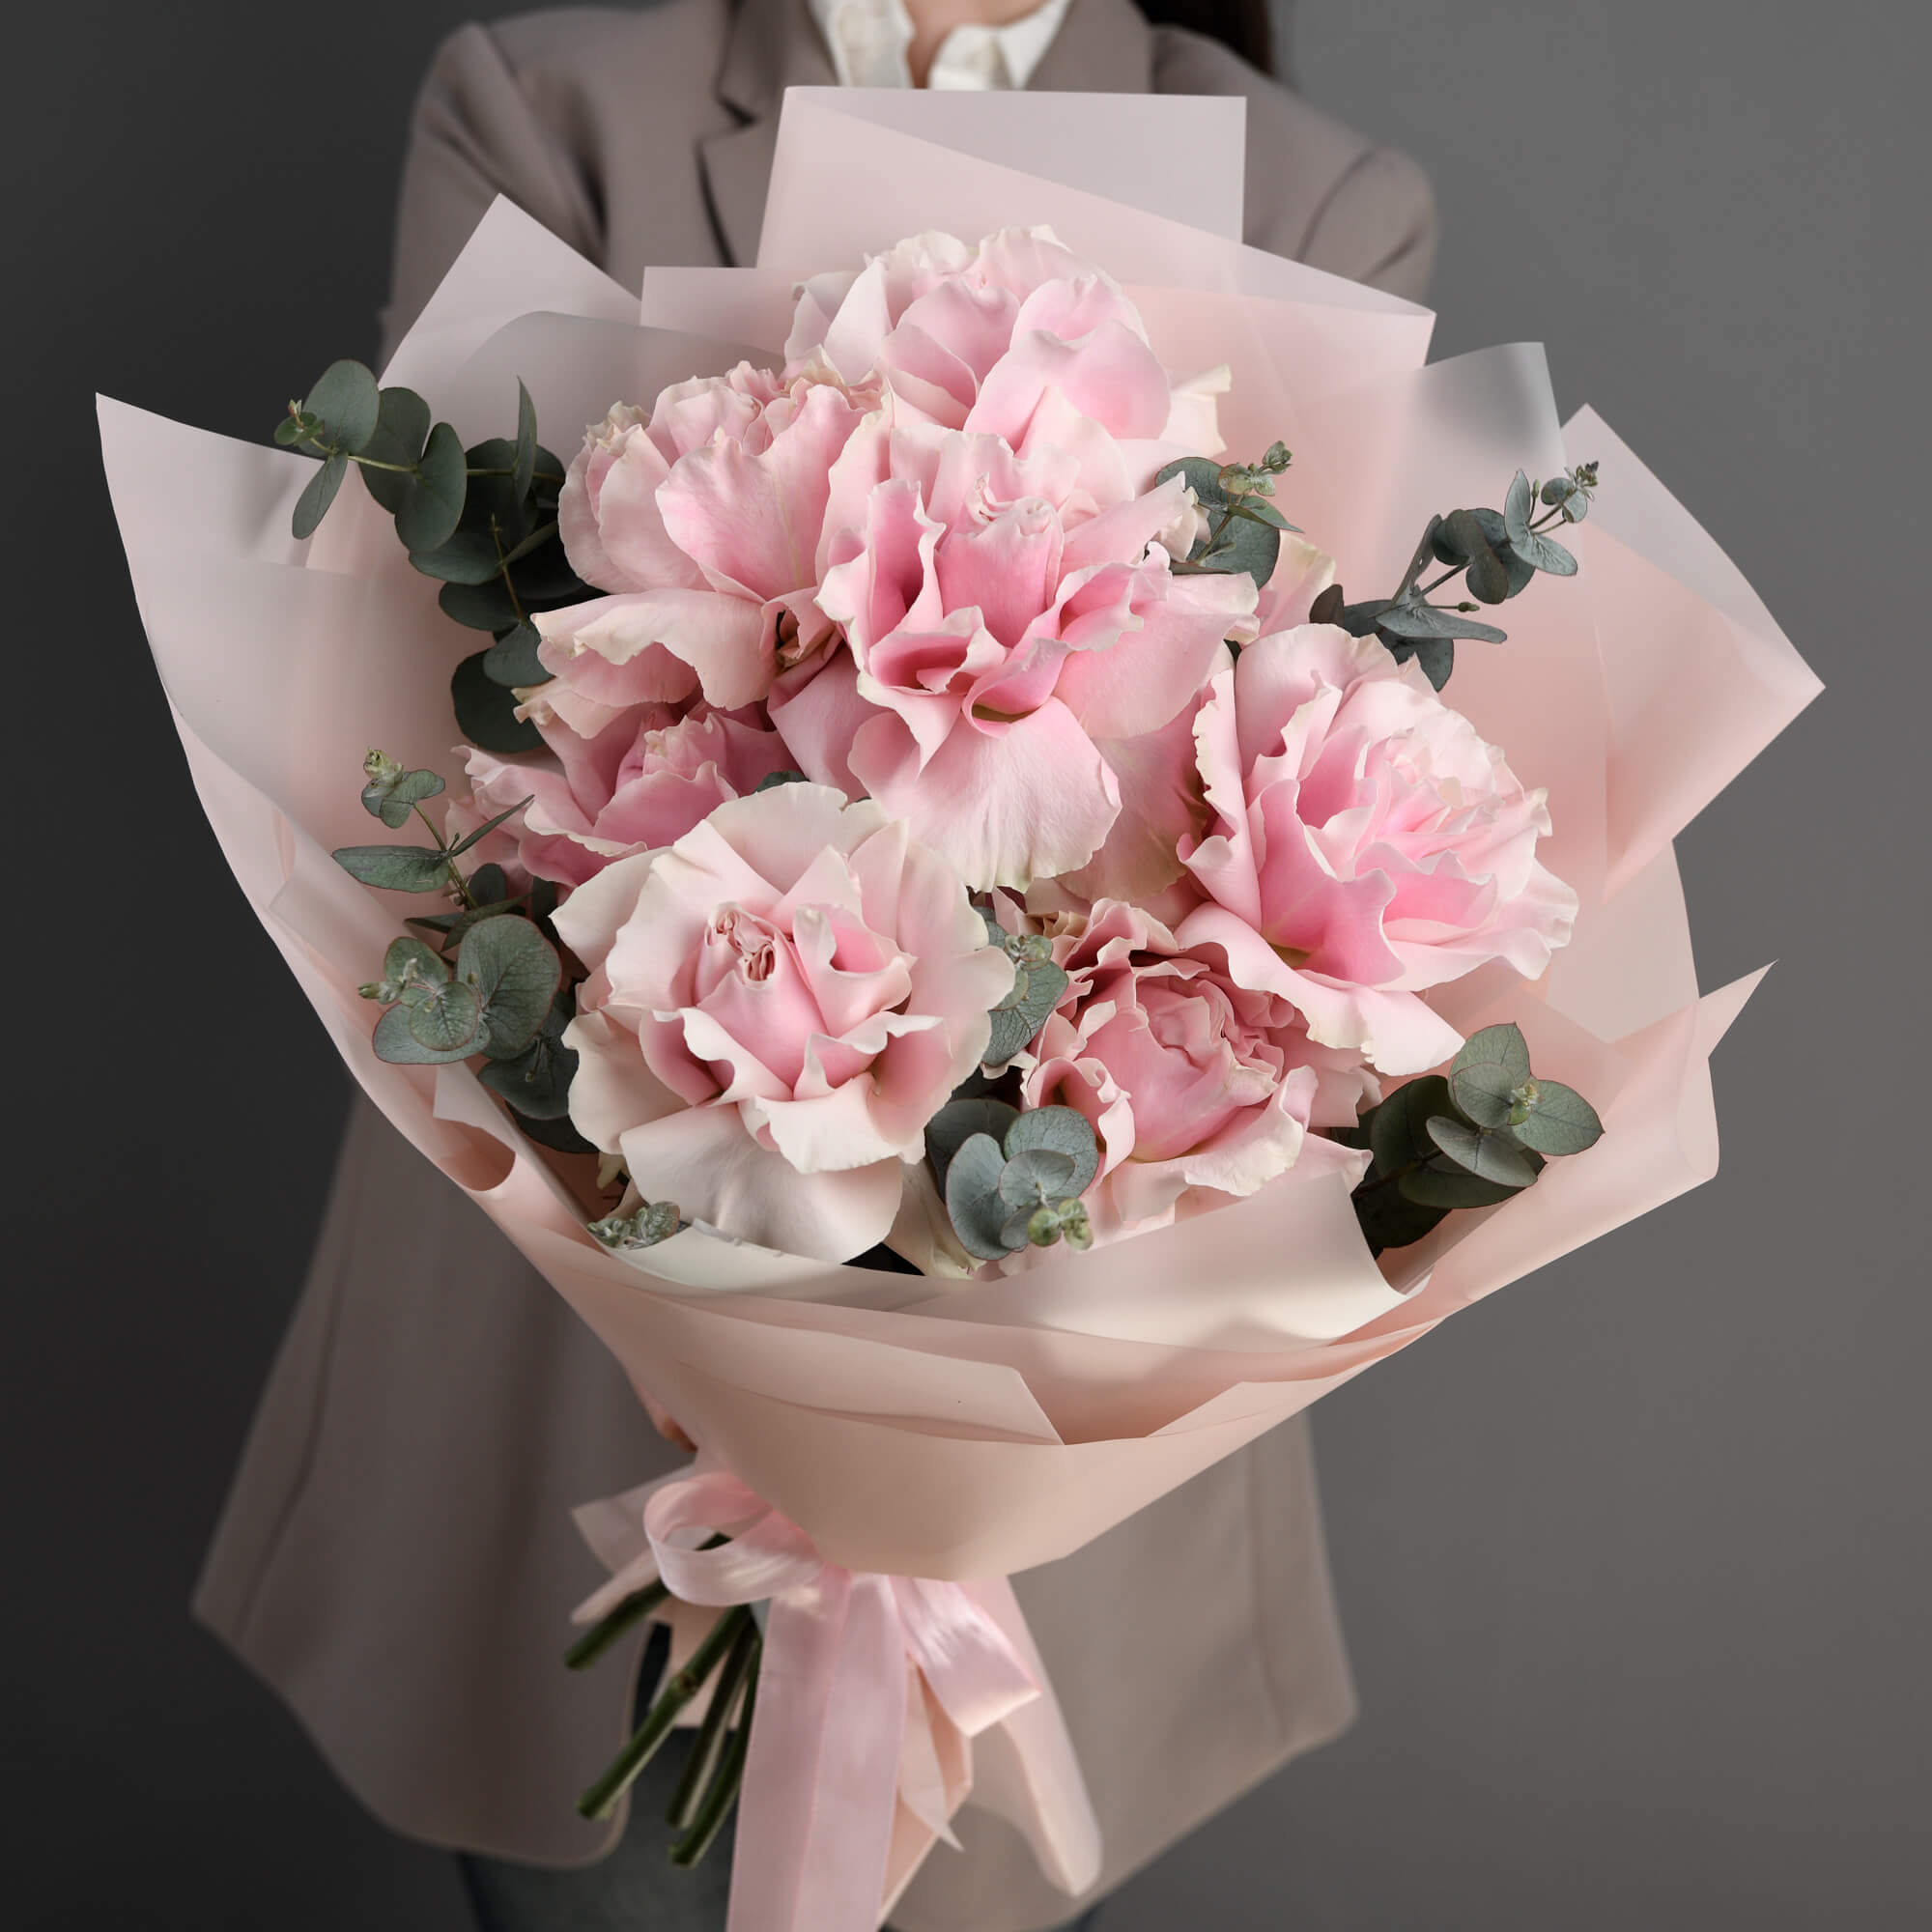 Bouquet of 9 special pink roses and eucalyptus